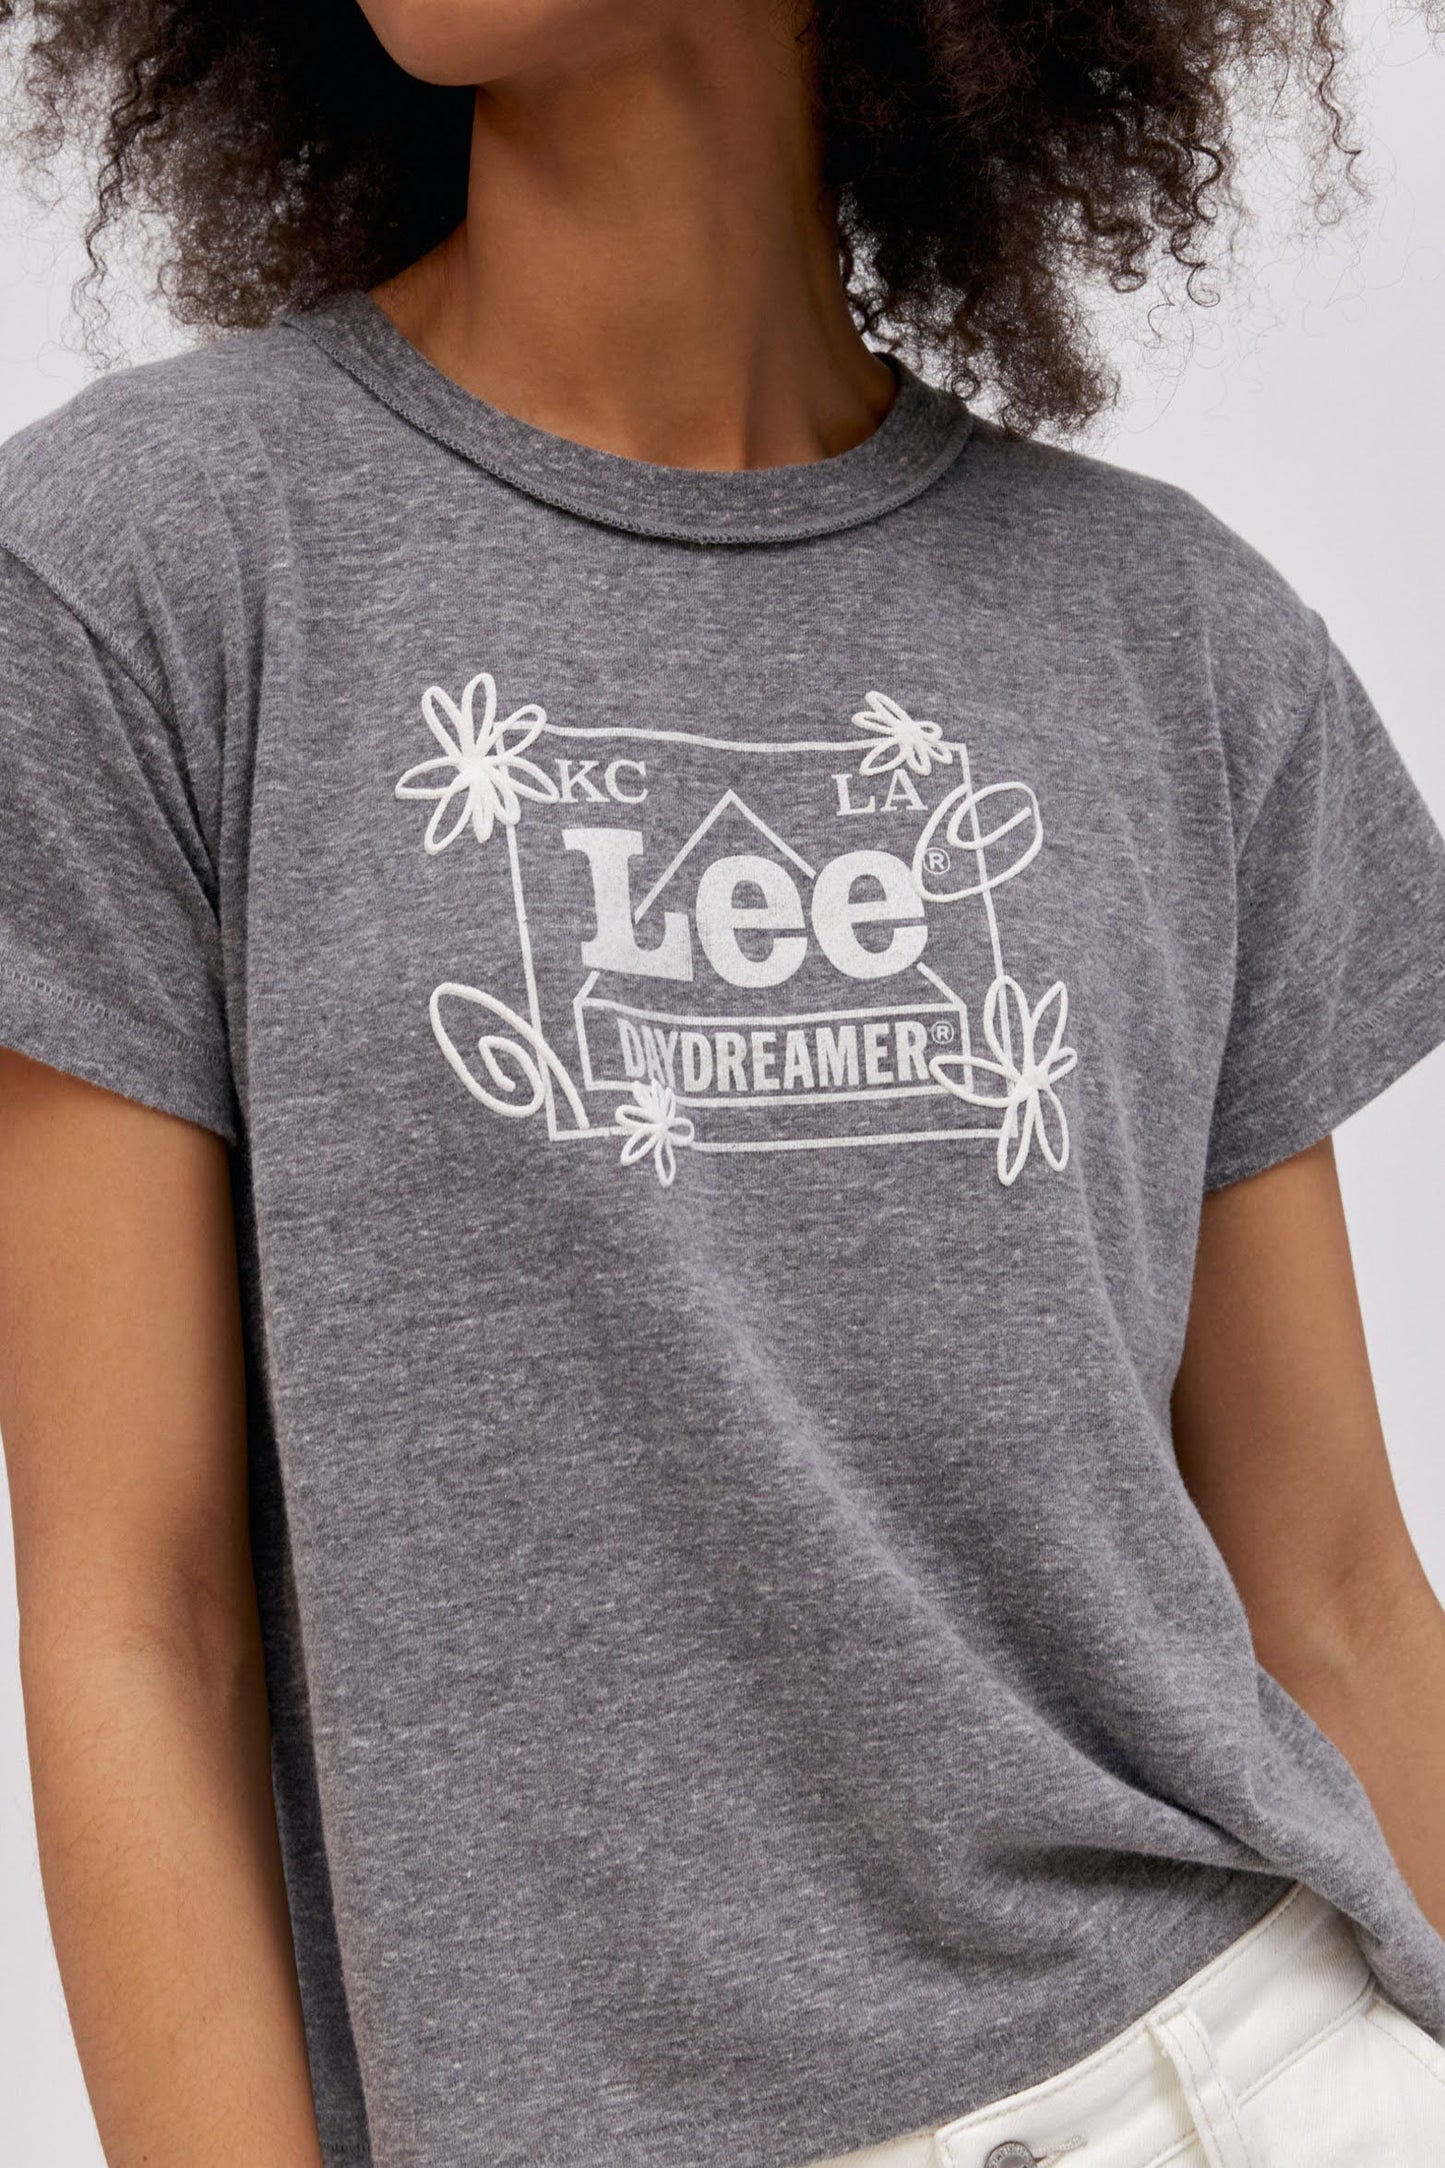 A curly-haired model featuring a heather grey reverse gf tee designed with the original Lee workwear logo reimagined into an exclusive, co-branded graphic with layered doodles in puff ink.